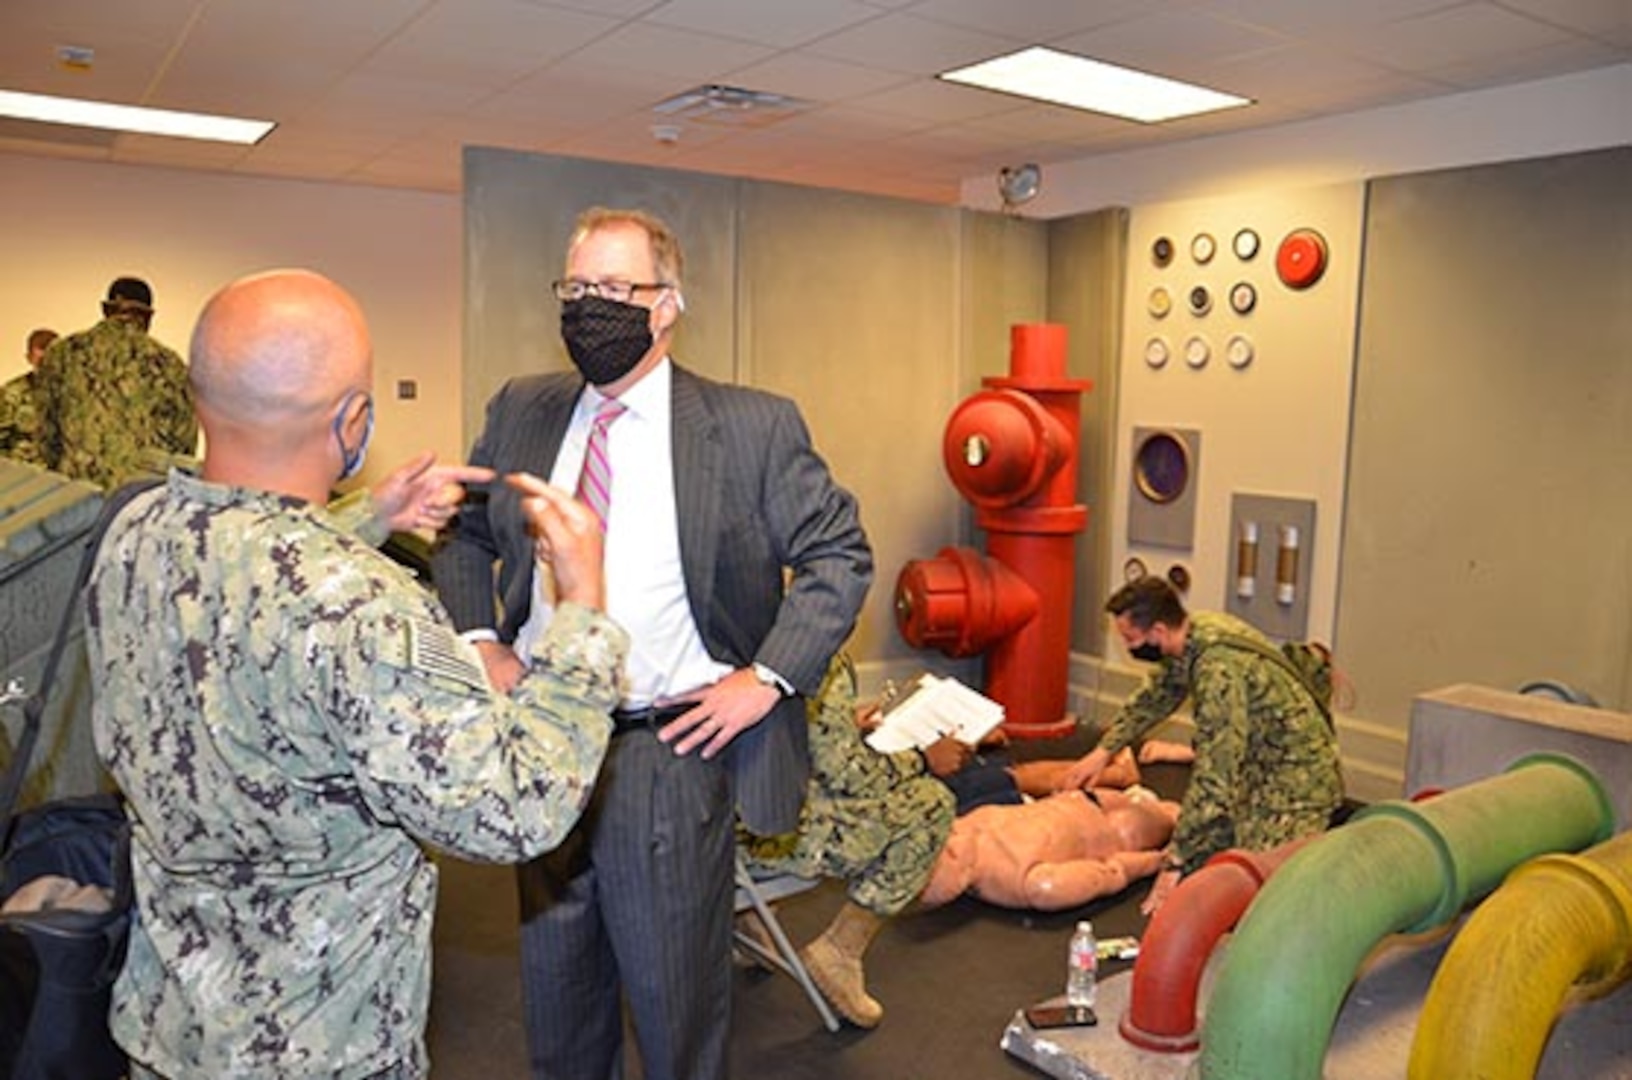 The Honorable Thomas McCaffery, Assistant Secretary of Defense for Health Affairs, is given a tour of the Shipboard Mass Casualty simulator by Cmdr. Ruben Lopez, Department Chair of the Navy Hospital Corpsman Basic program